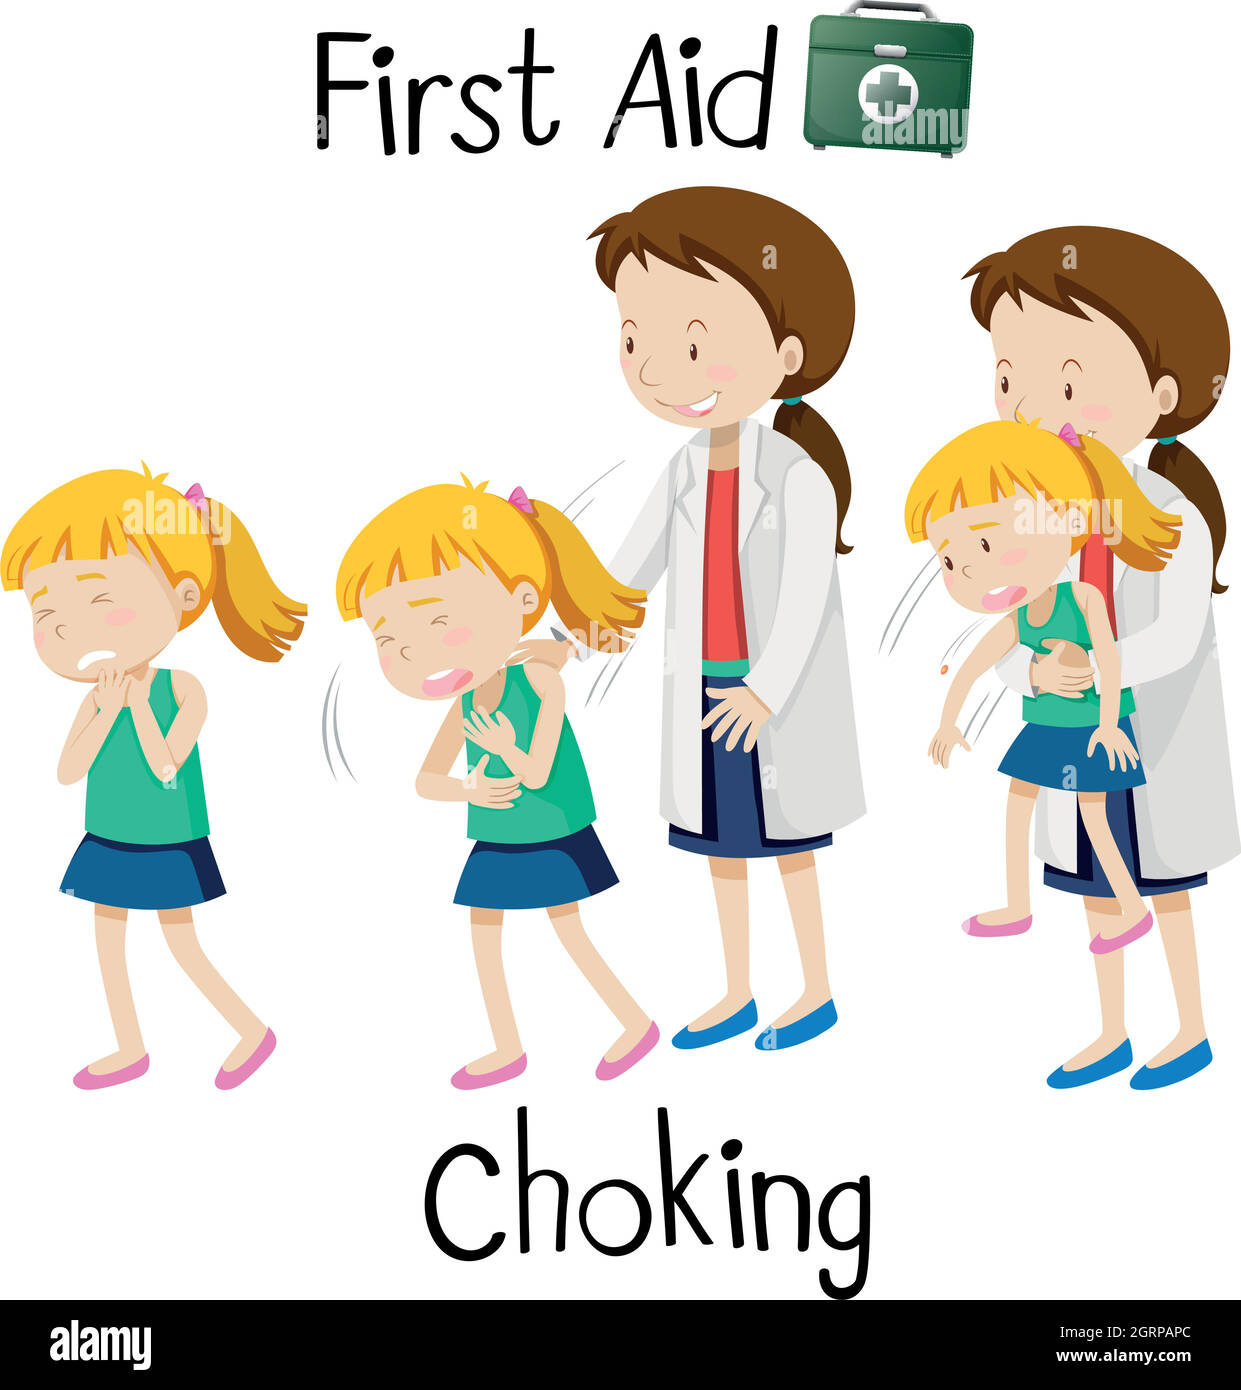 First aid for chocking Stock Vector